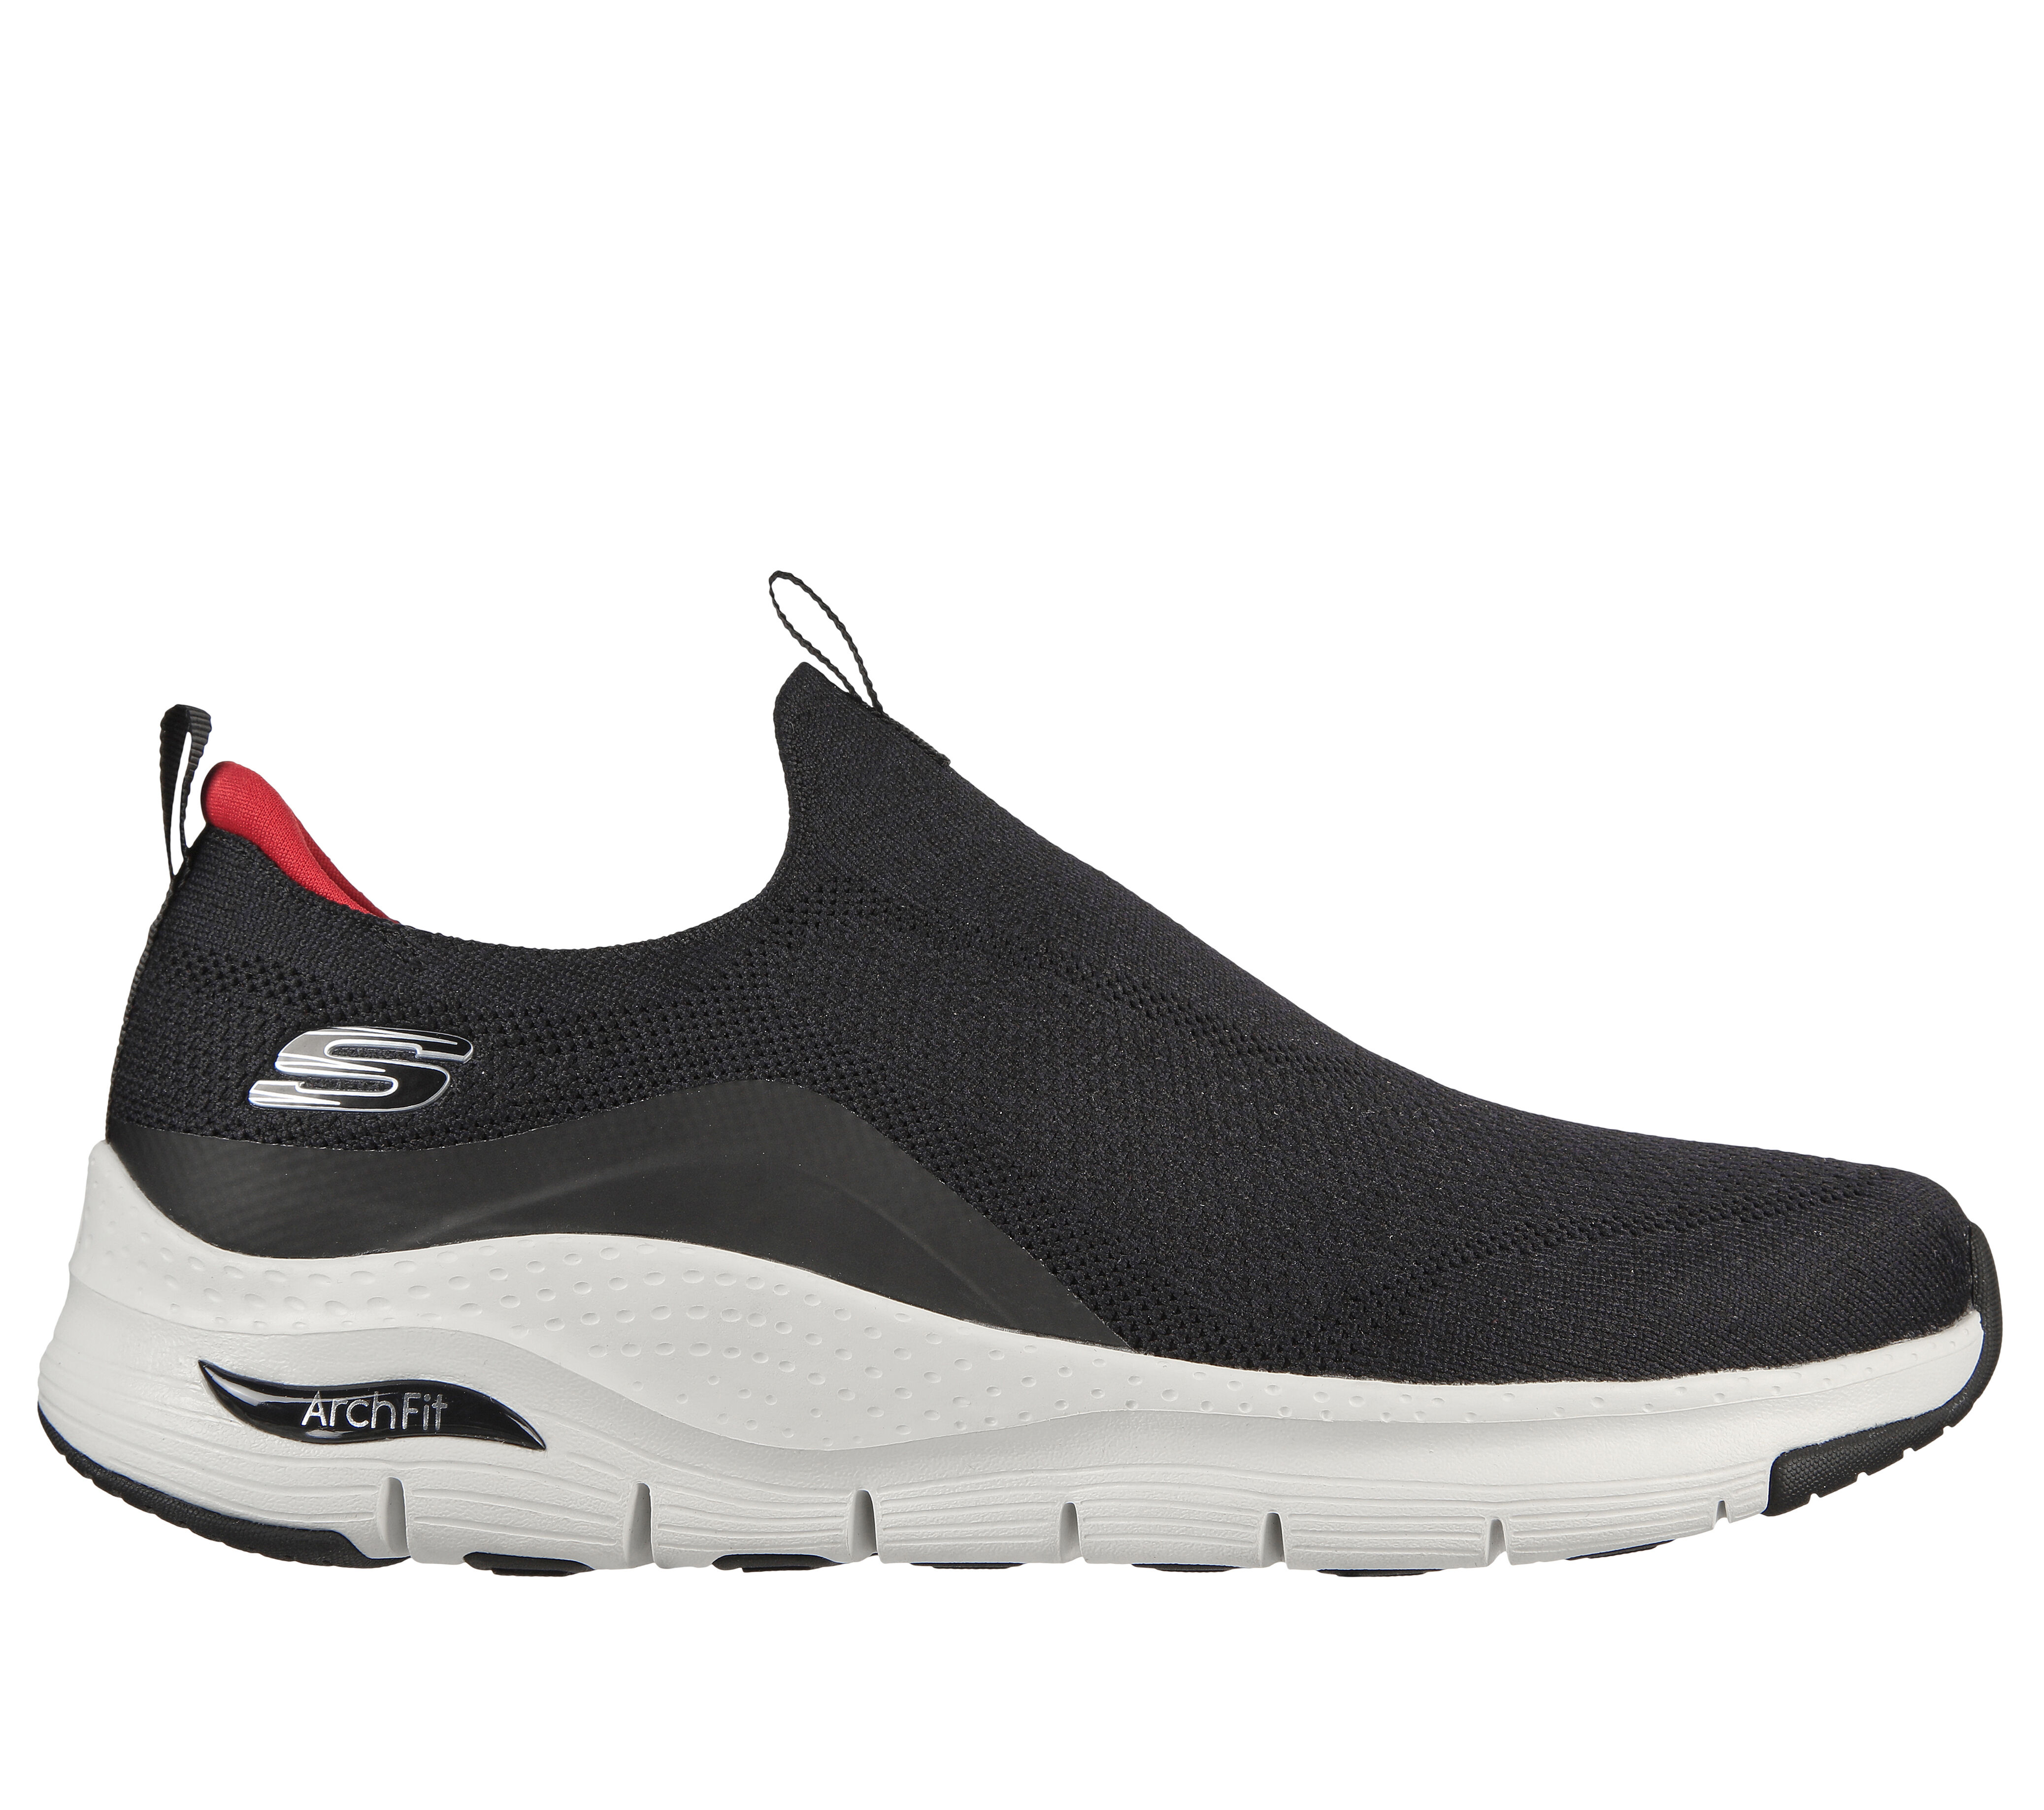 skechers shoes for men with price